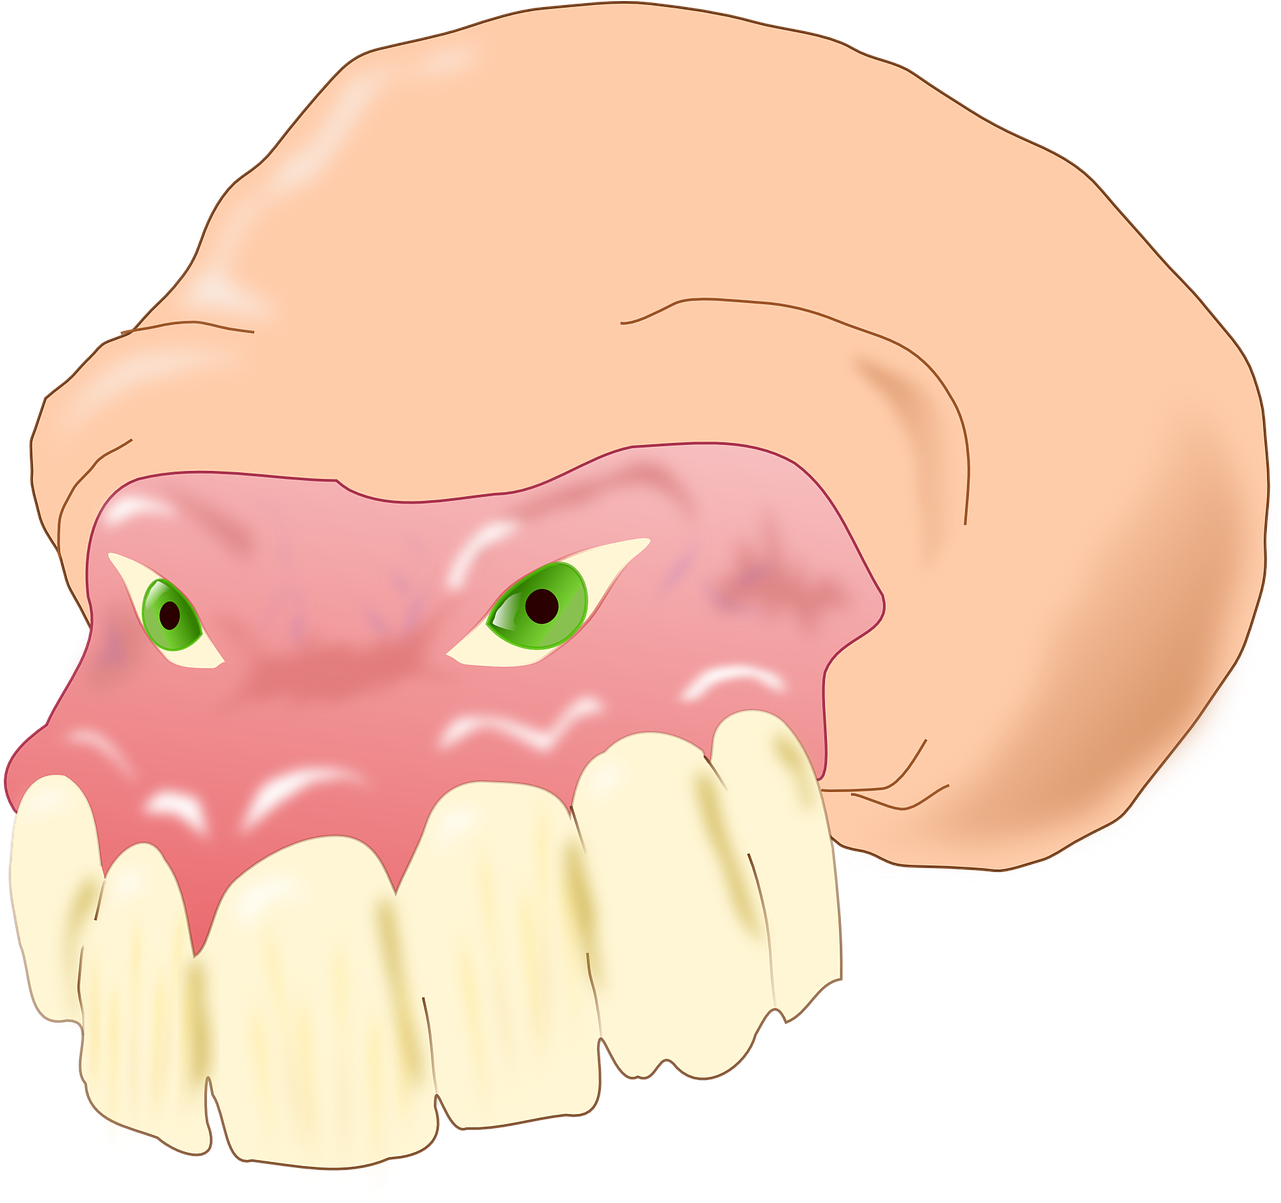 Animated Molar Toothwith Gums PNG image